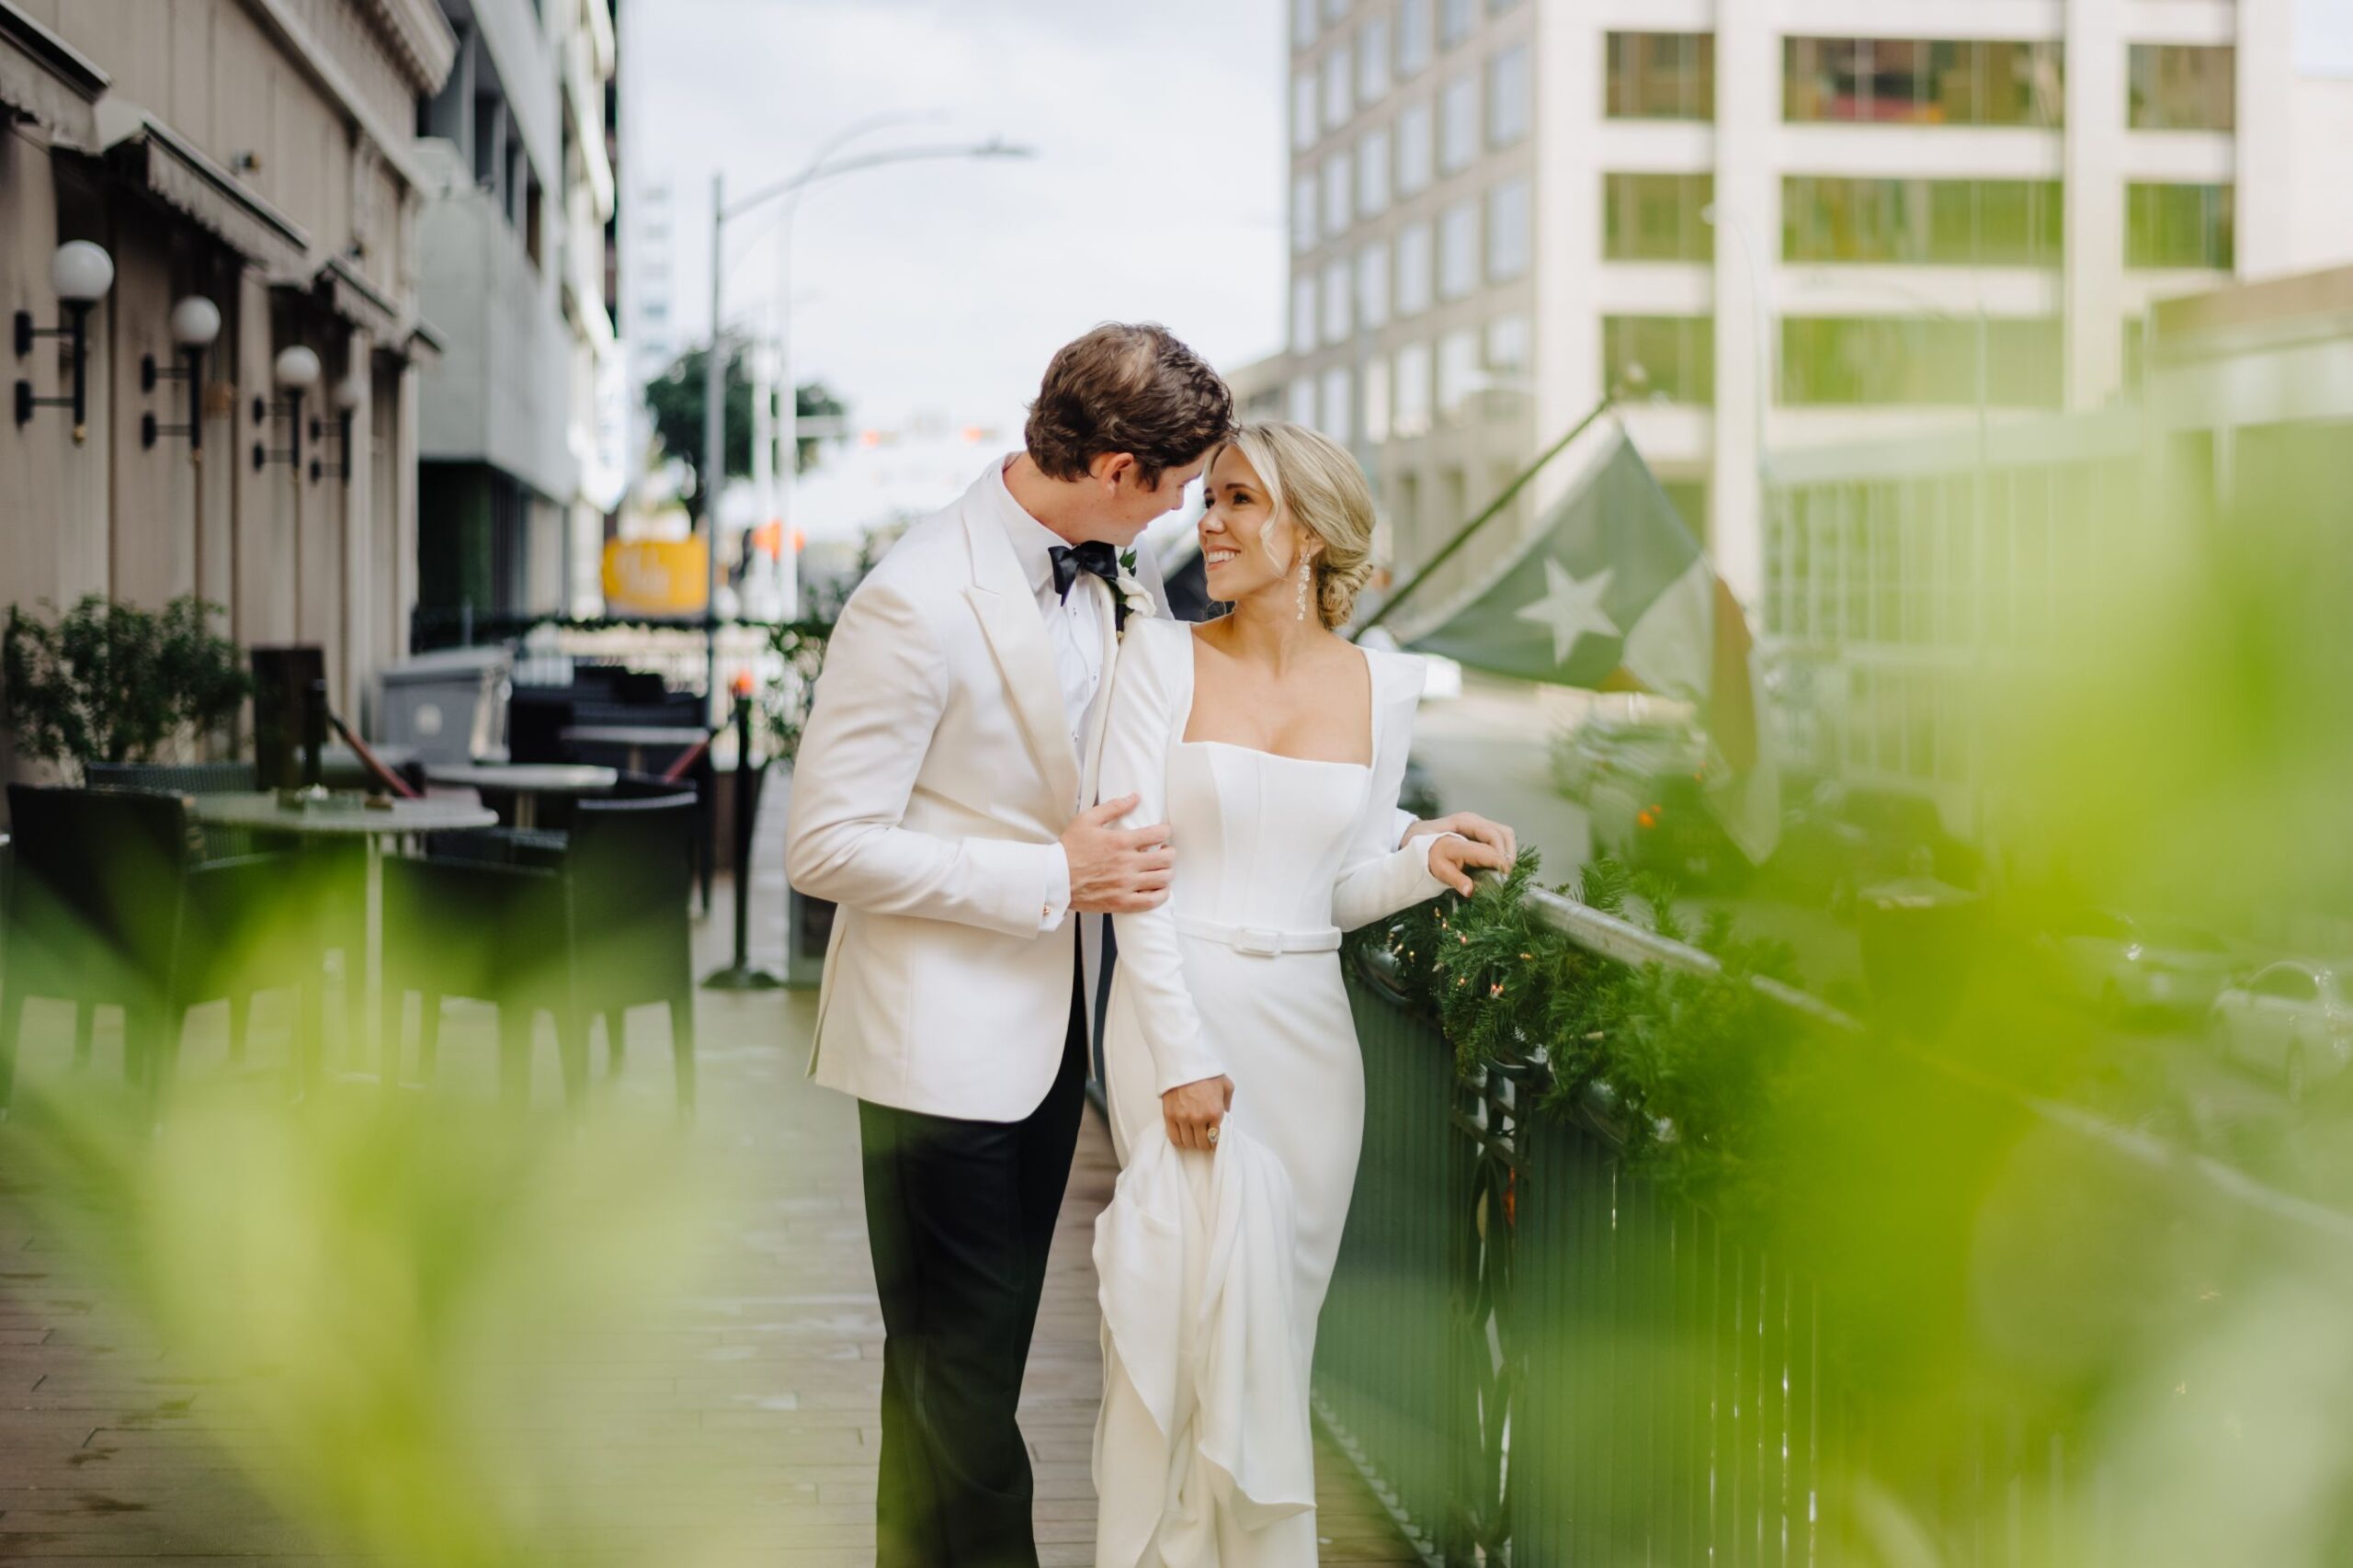 Bride and groom are walking on a patio, smiling and looking into each other's eyes. A Texas flag hangs in the background with tall Austin buildings in the distance.